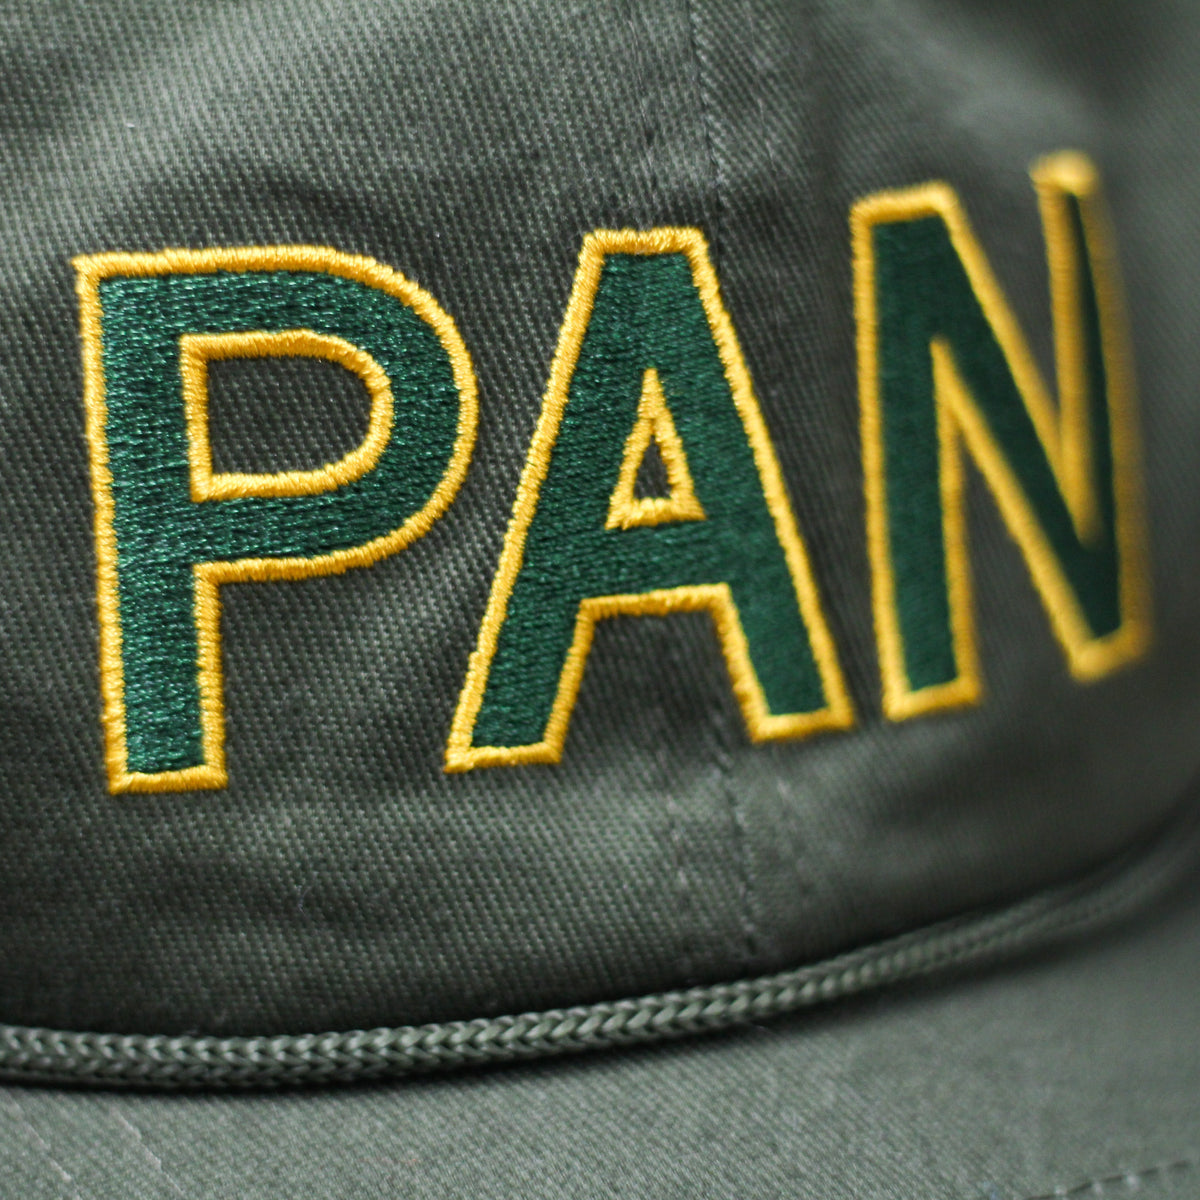 the lost bros Pan Cast Hat